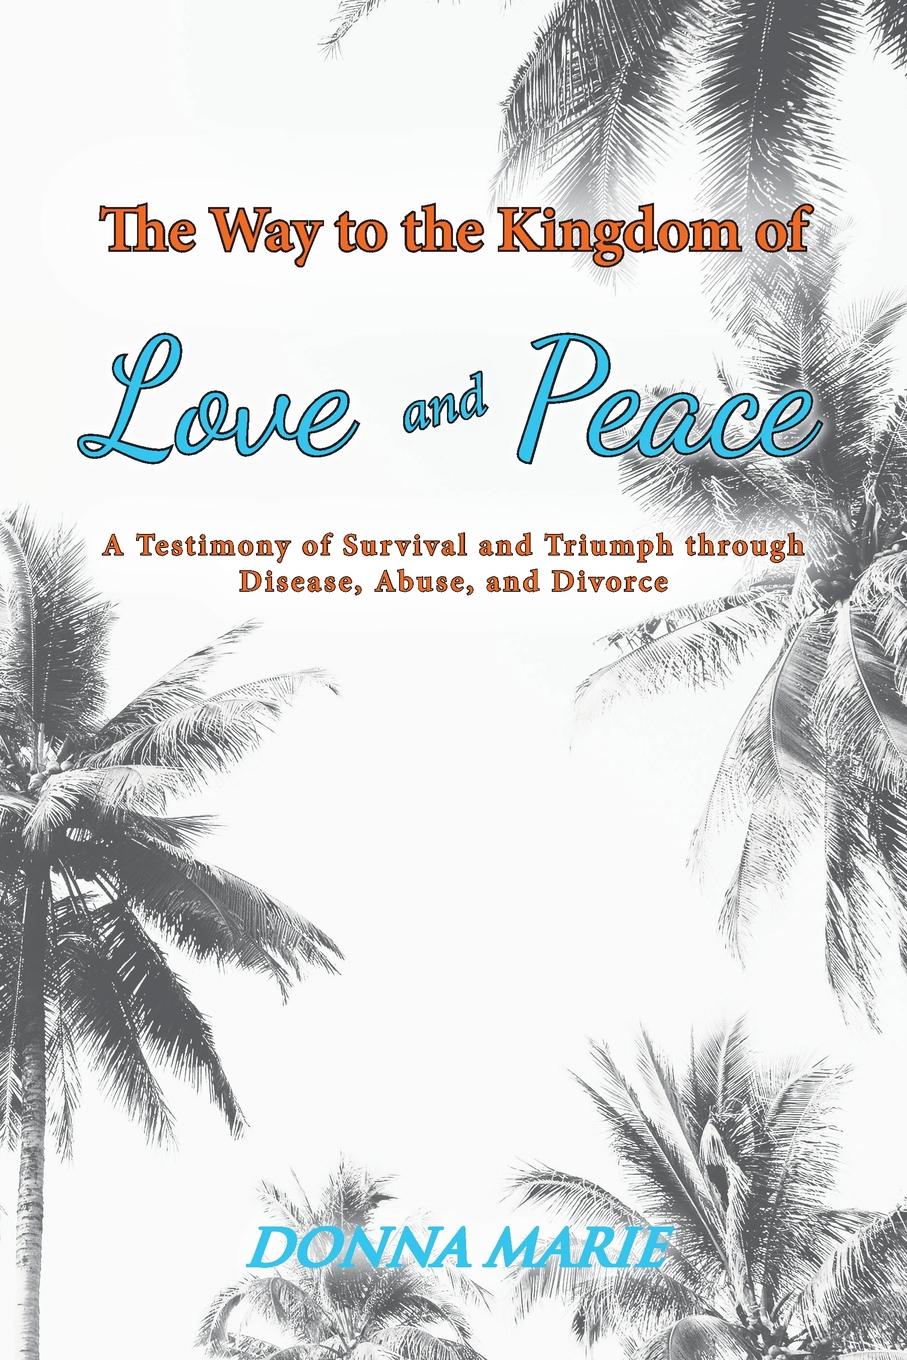 The Way to the Kingdom of Love and Peace. A Testimony of Survival and Triumph through Disease, Abuse, and Divorce